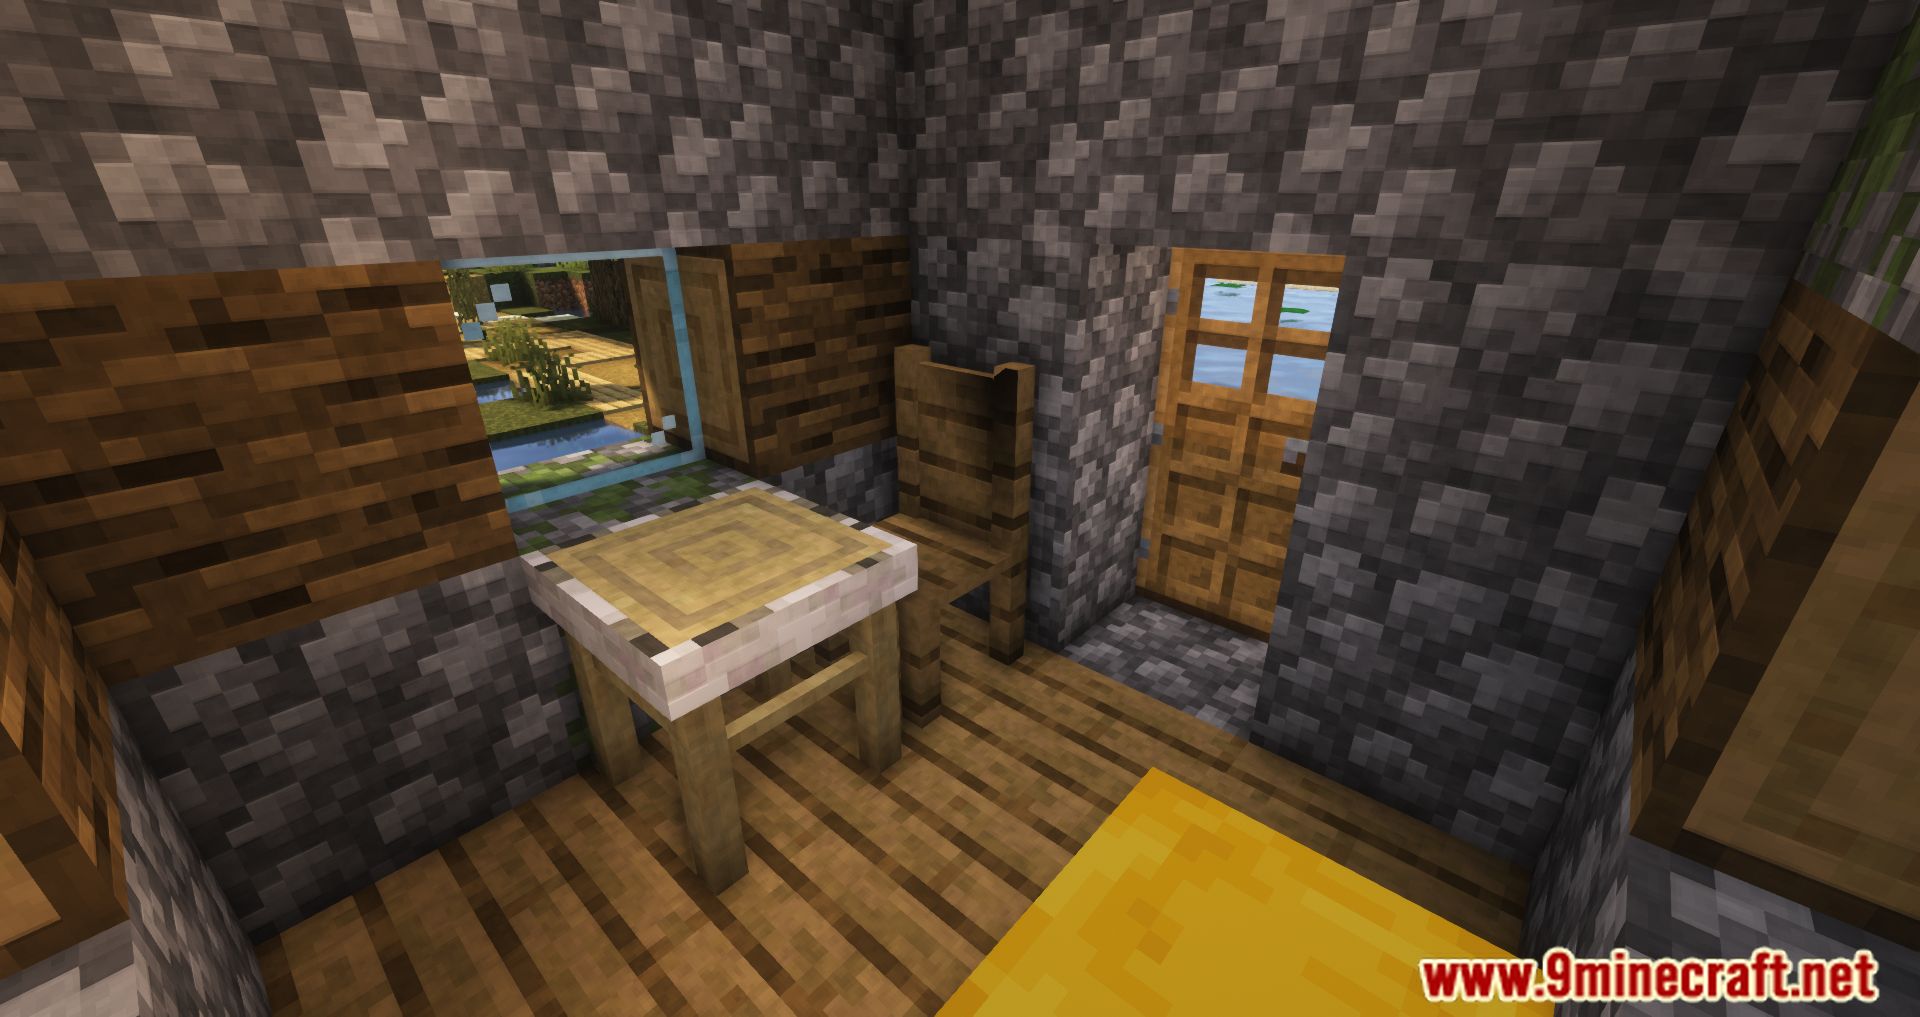 City Blocks Mod (1.16.5) - Sink, Table And Chairs, And Your House 11